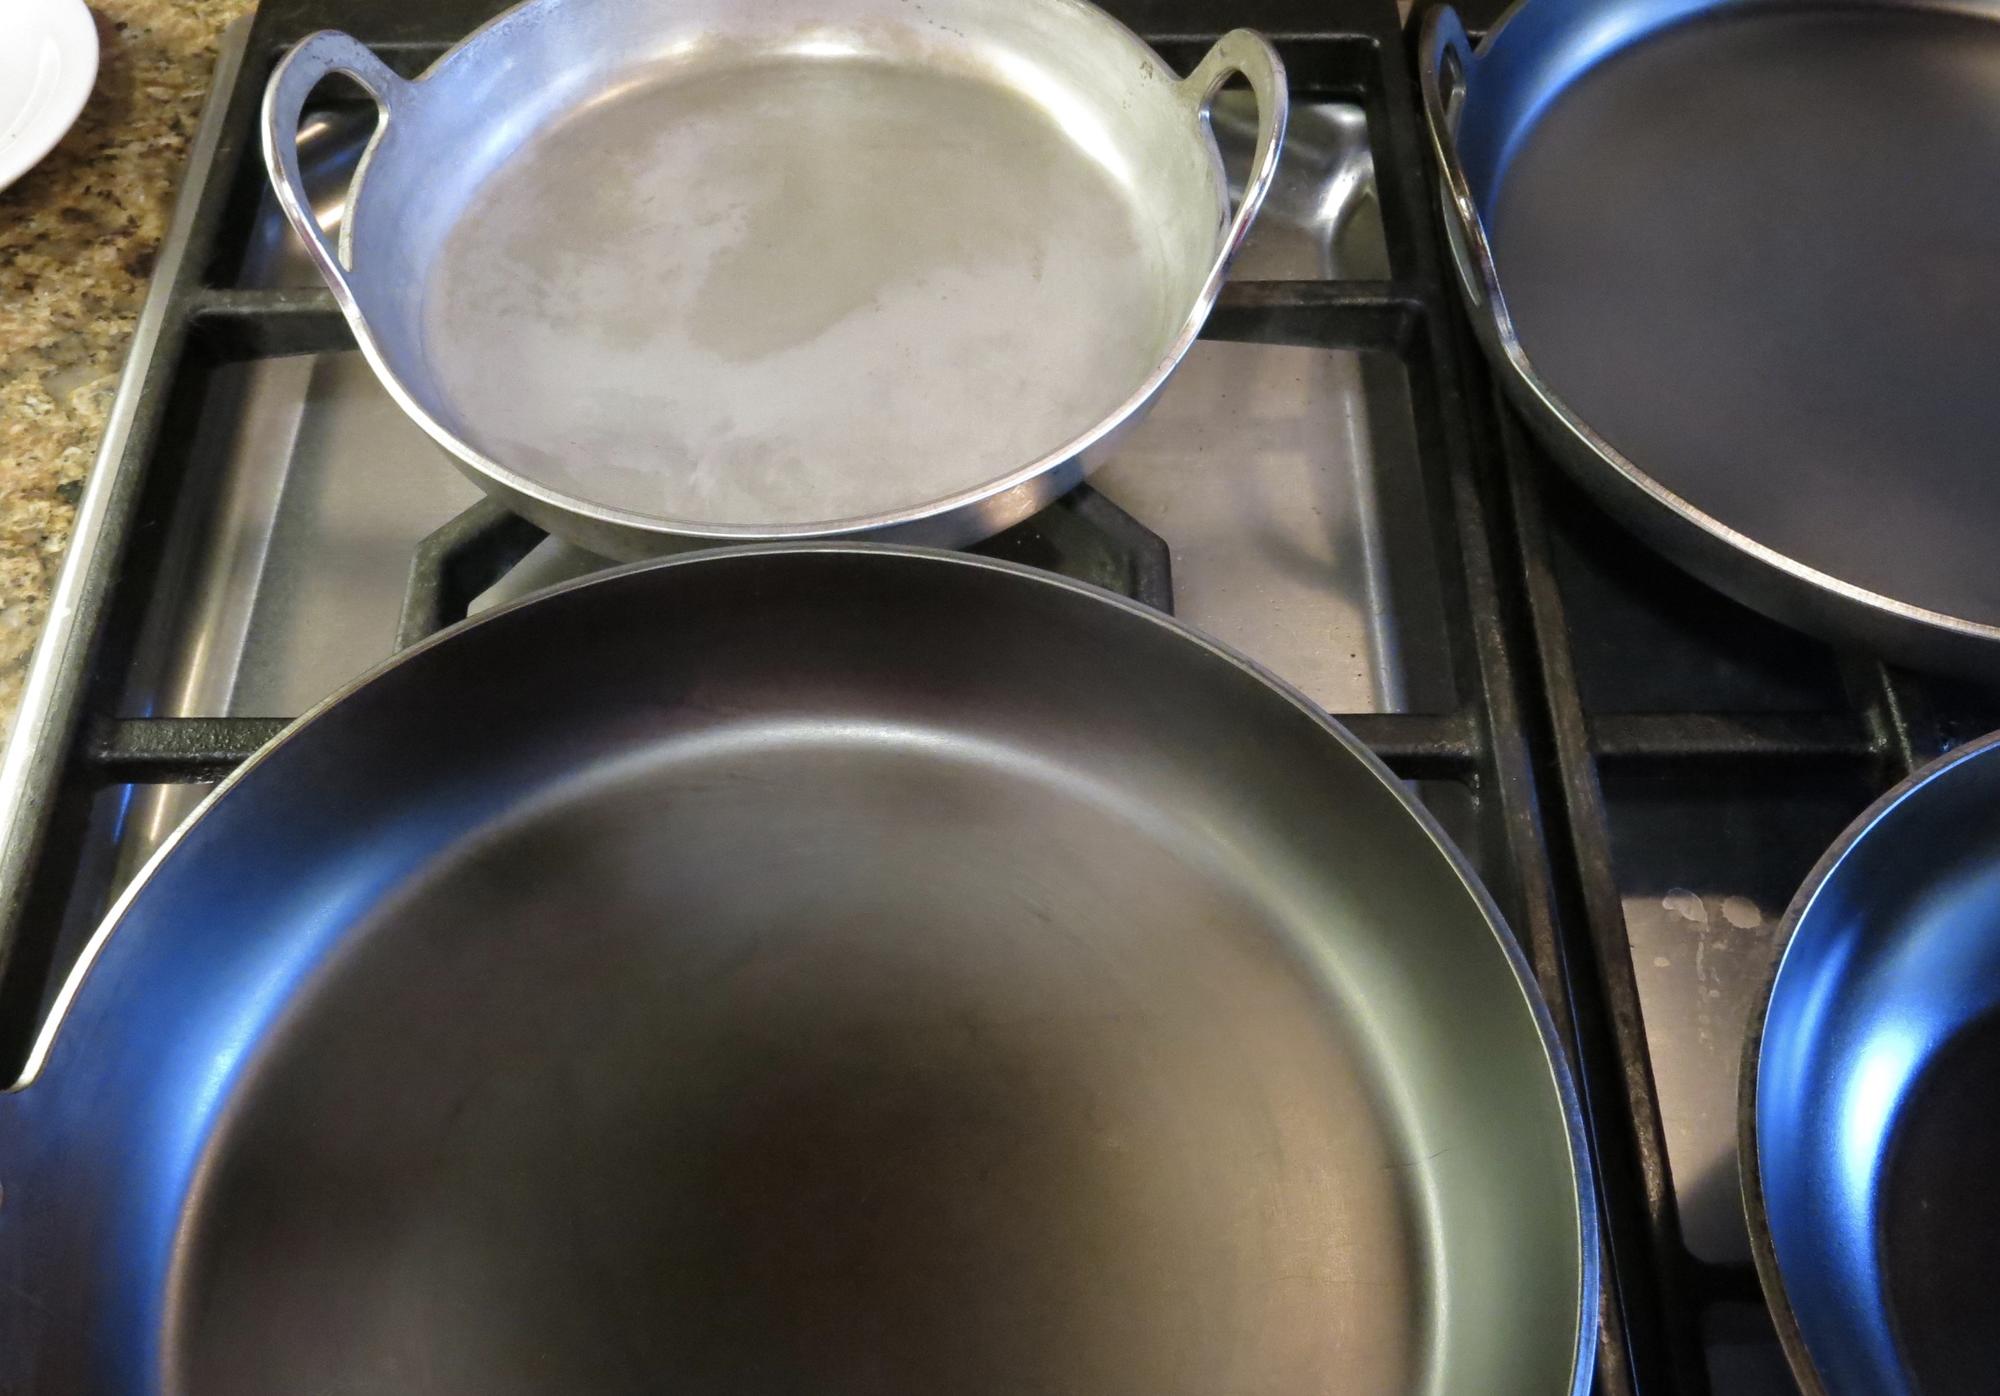 Small Saucepan Size - Kitchen Consumer - eGullet Forums